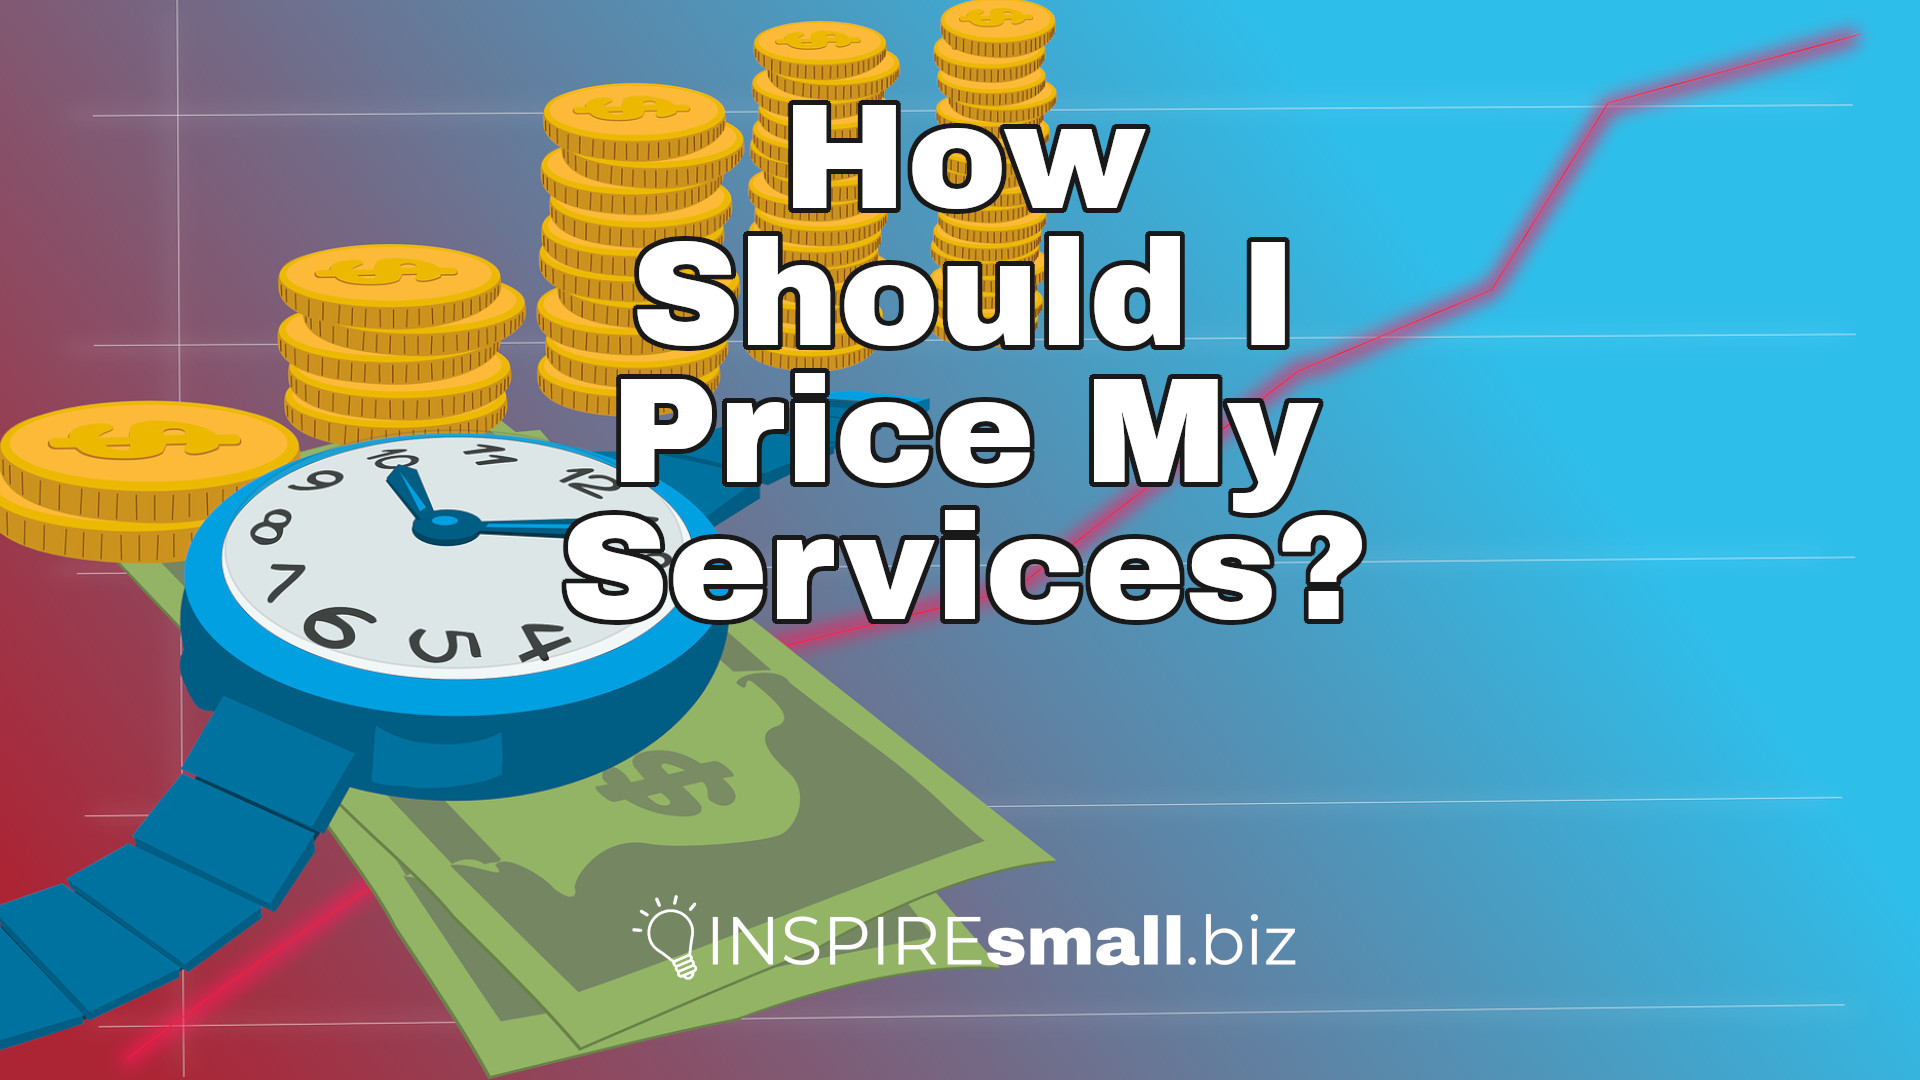 How Should I Price My Services?